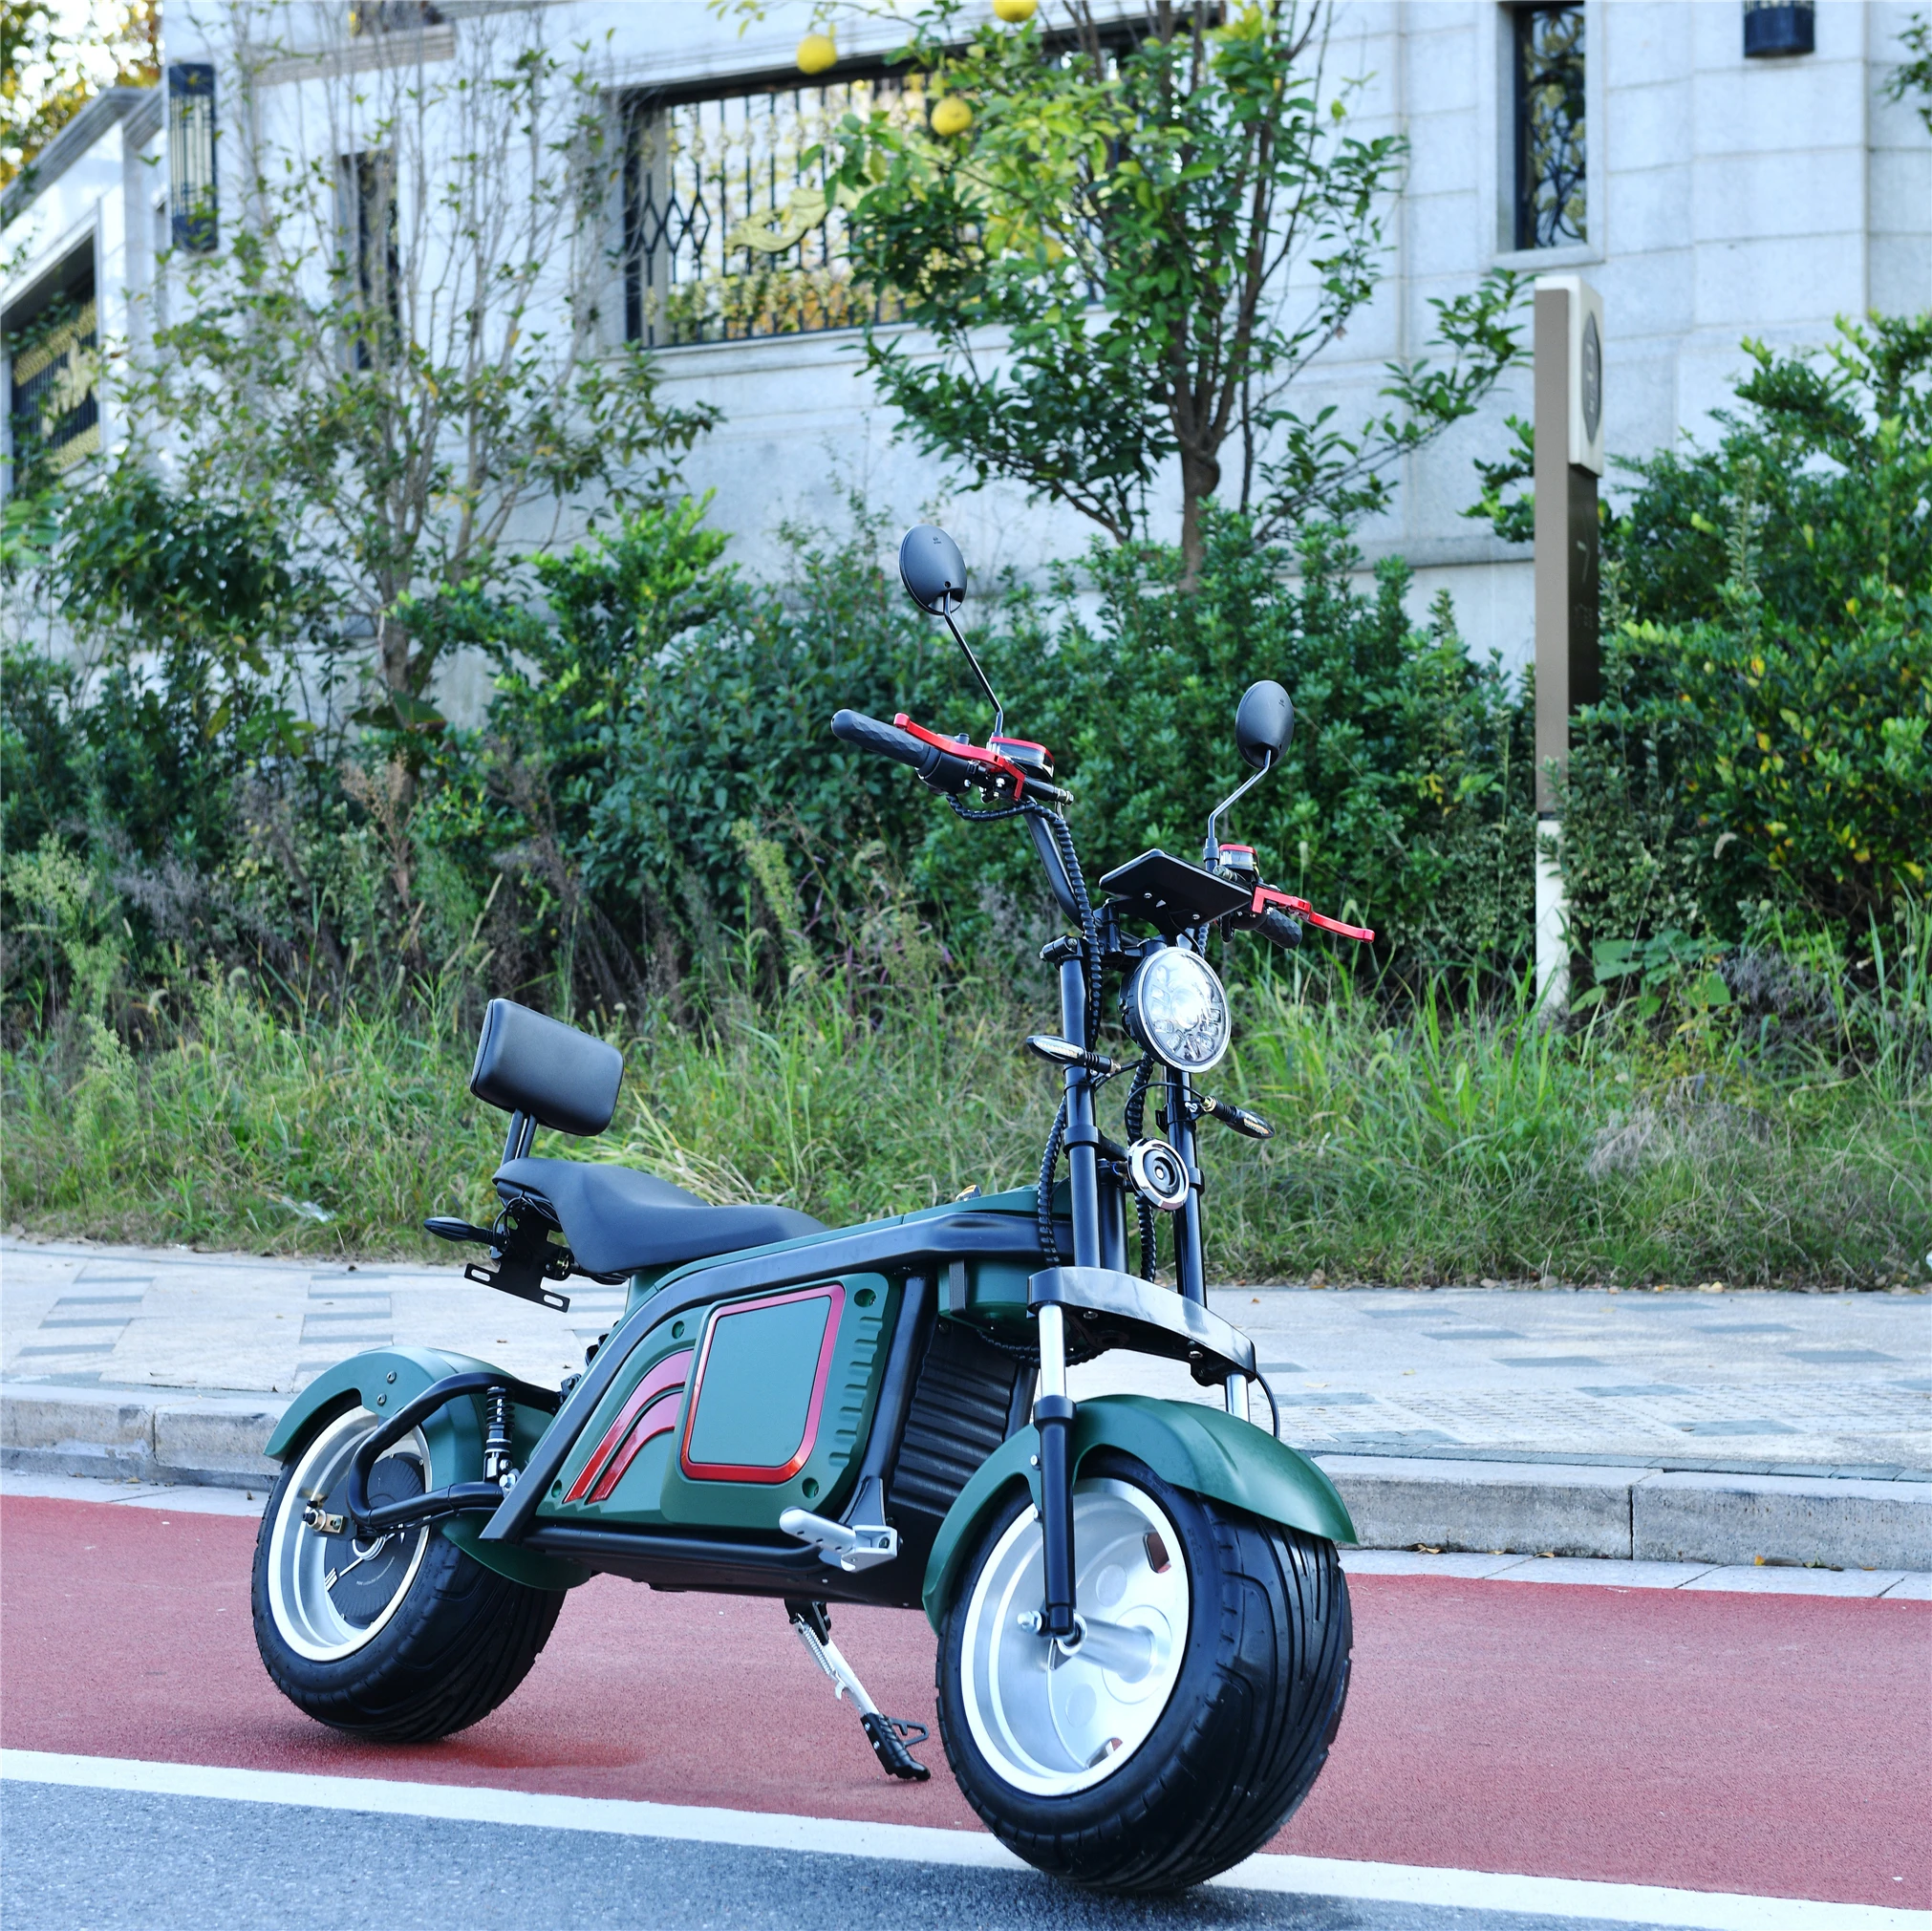 

2022 High Quality Cheap Price EEC Certification 3000W 30Ah Battery Electric Scooters Motorcycle